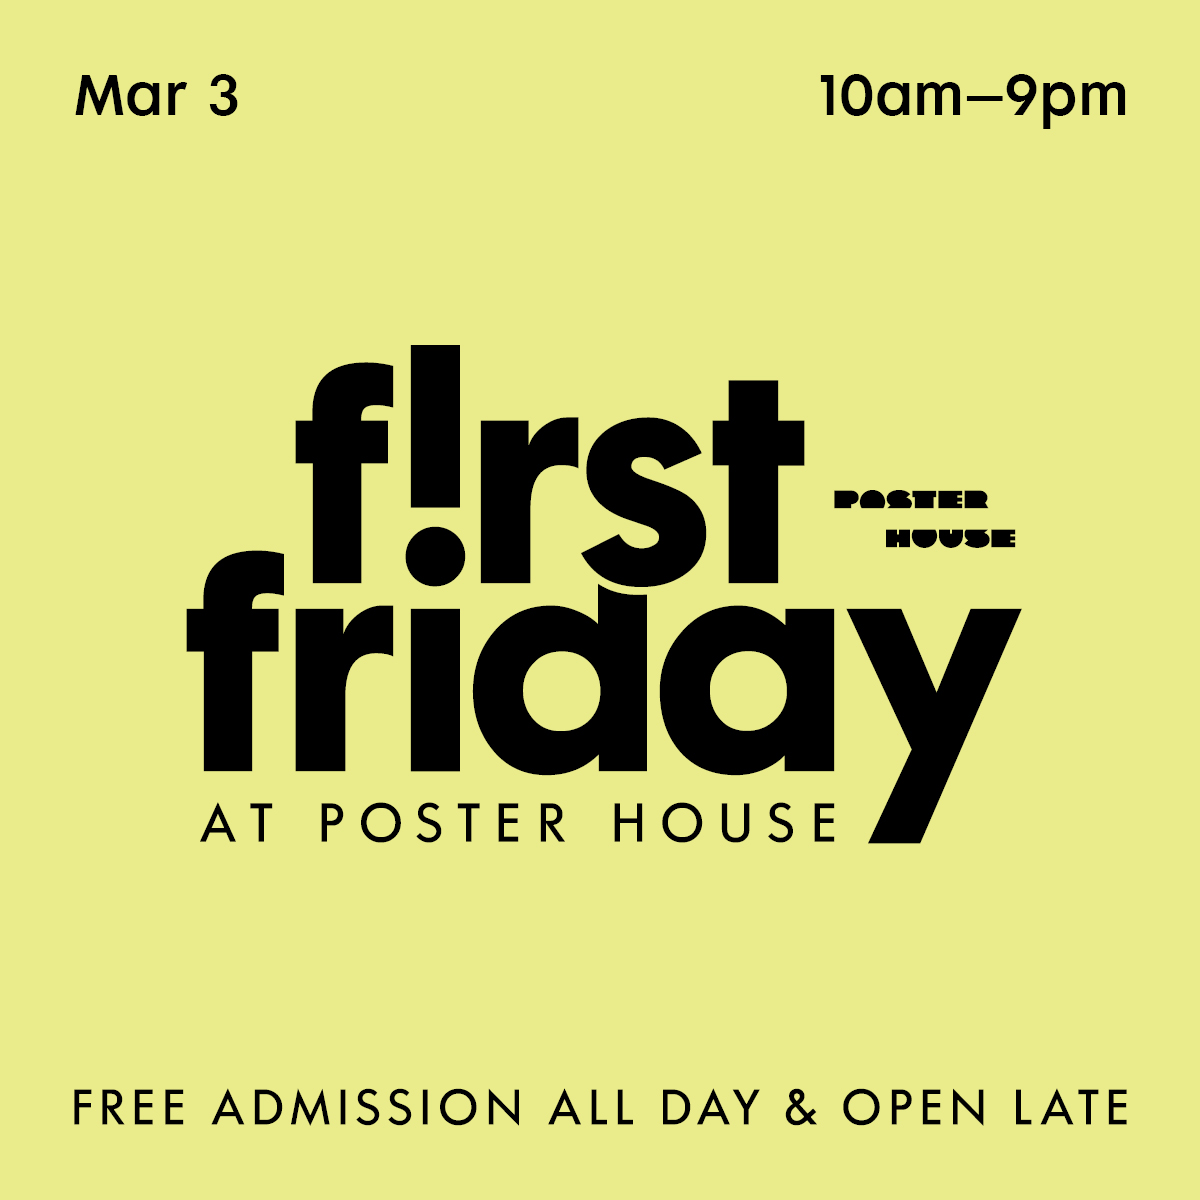 Yellow green text graphic promoting First Friday at Poster House, Free Admission on March 3.